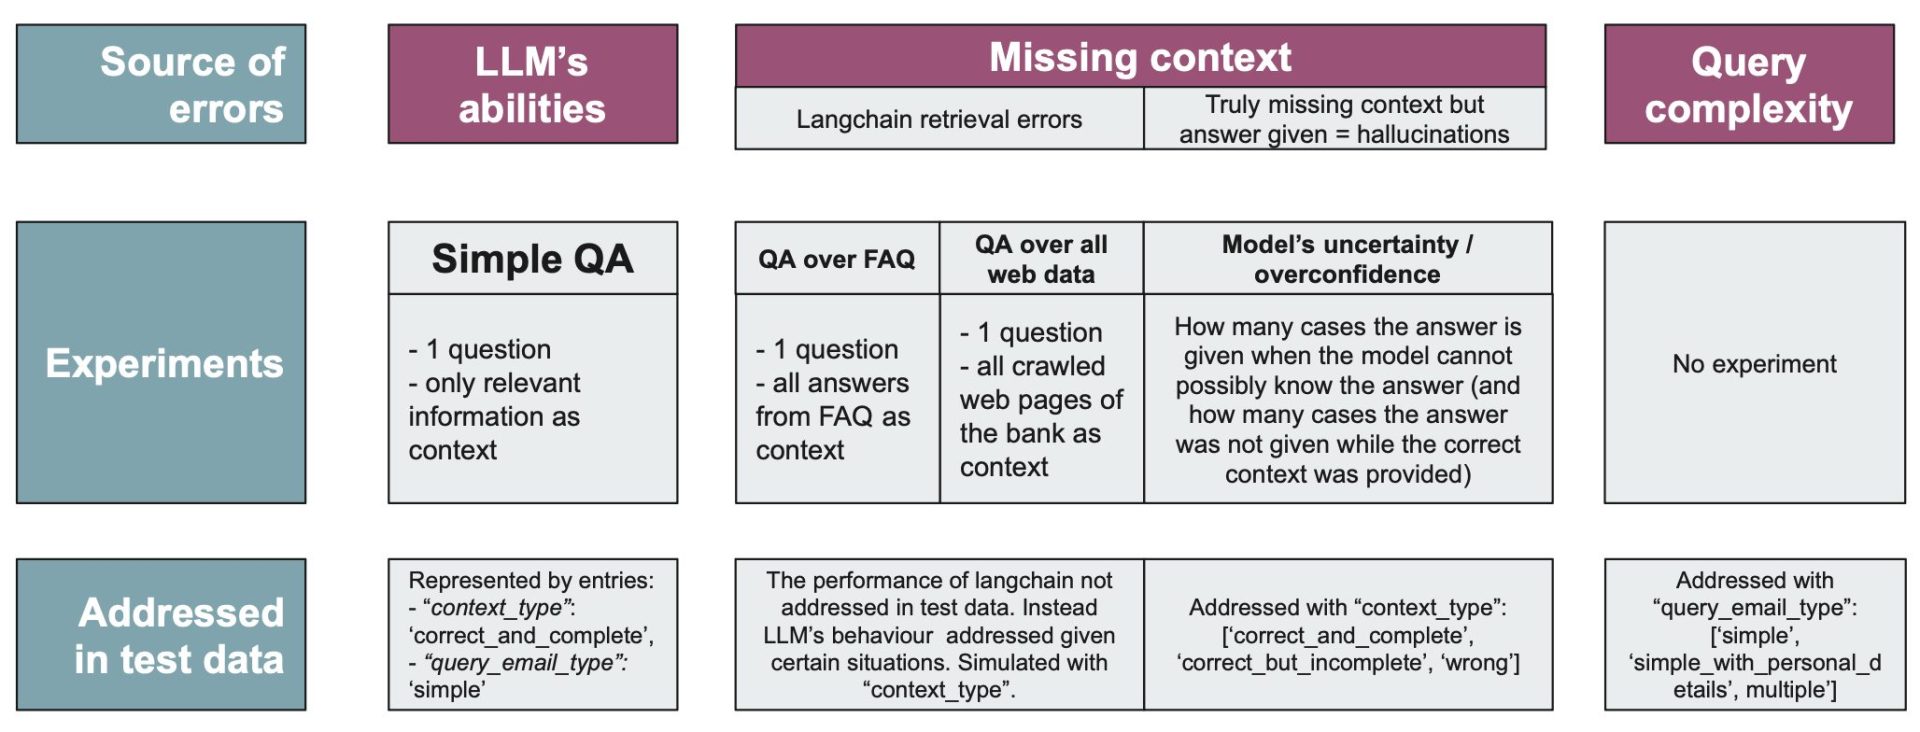 Possible sources of errors during LLM adaptation experiments and their investigation